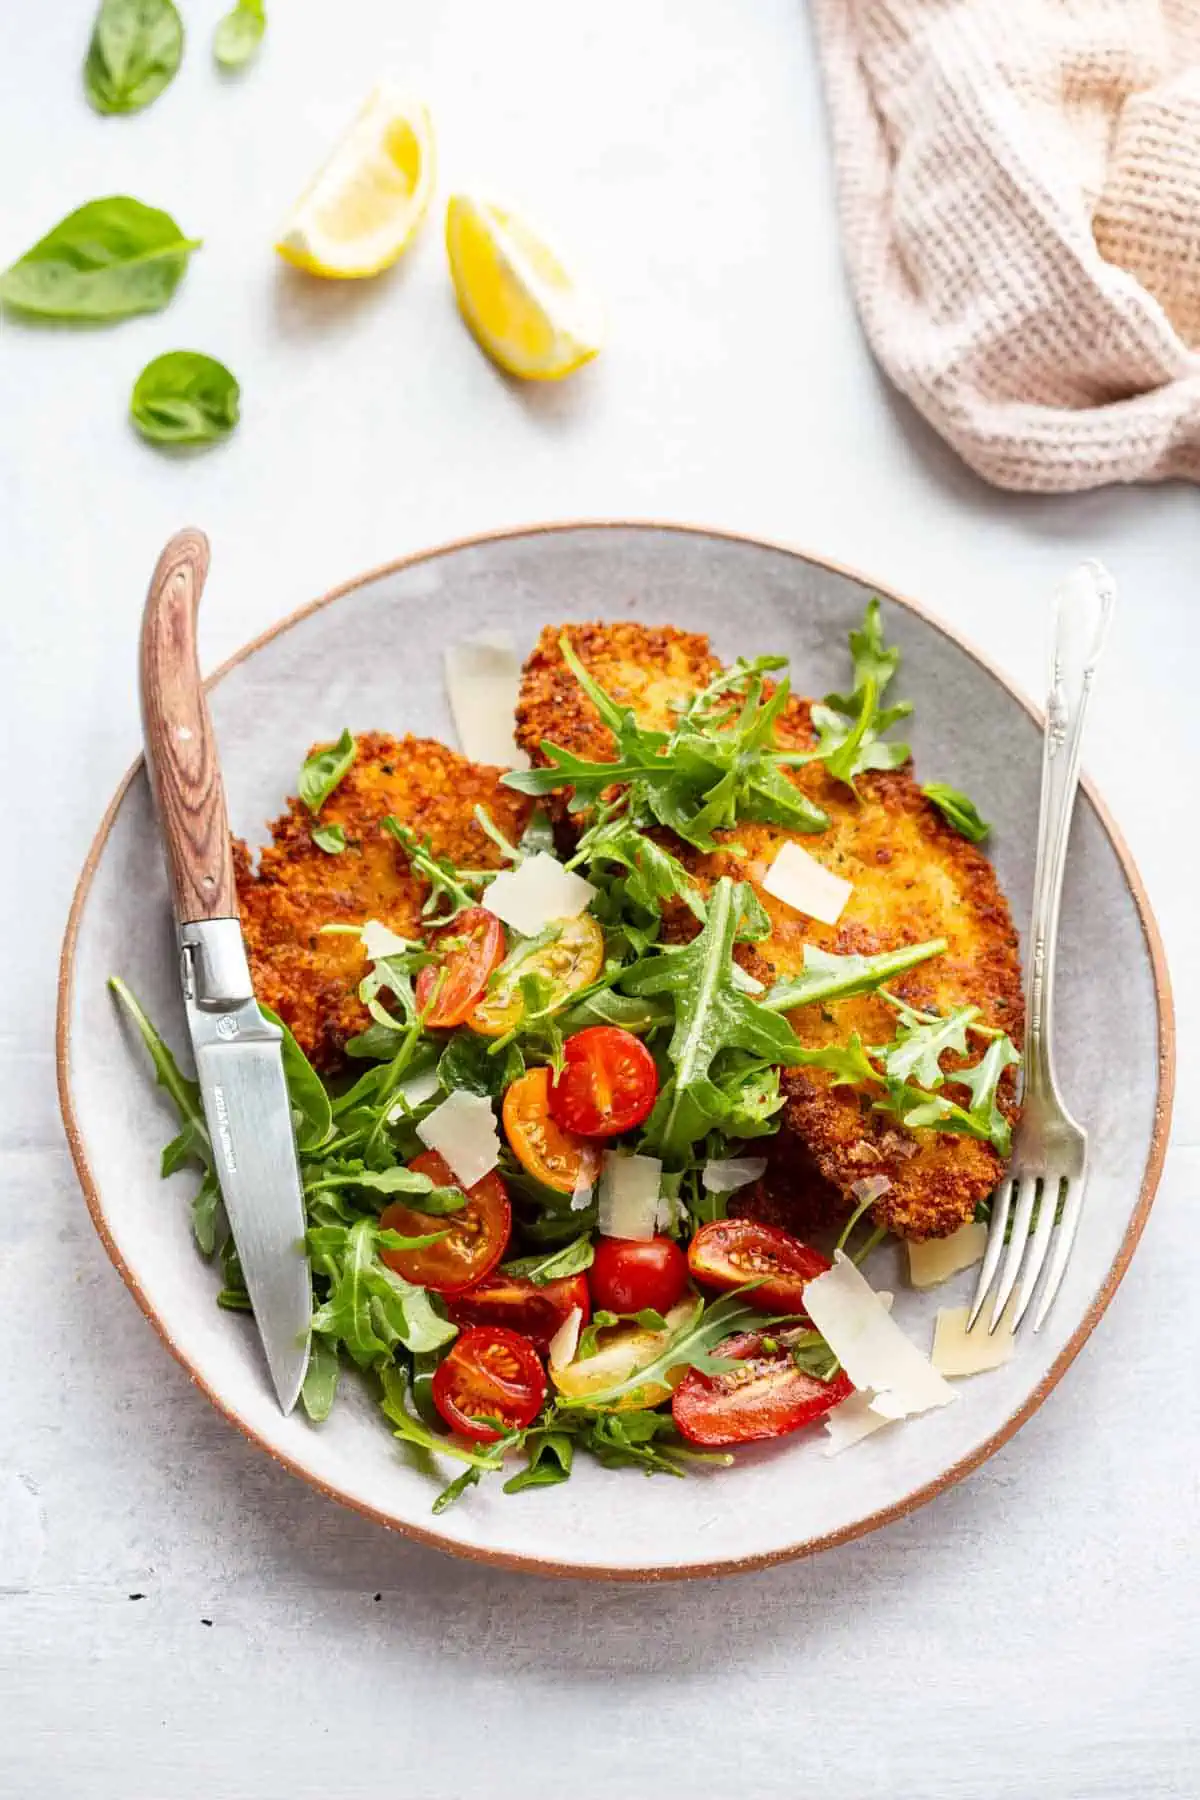 Crispy chicken Milanesa with tomato arugula salad on a white plate with fork and knife.